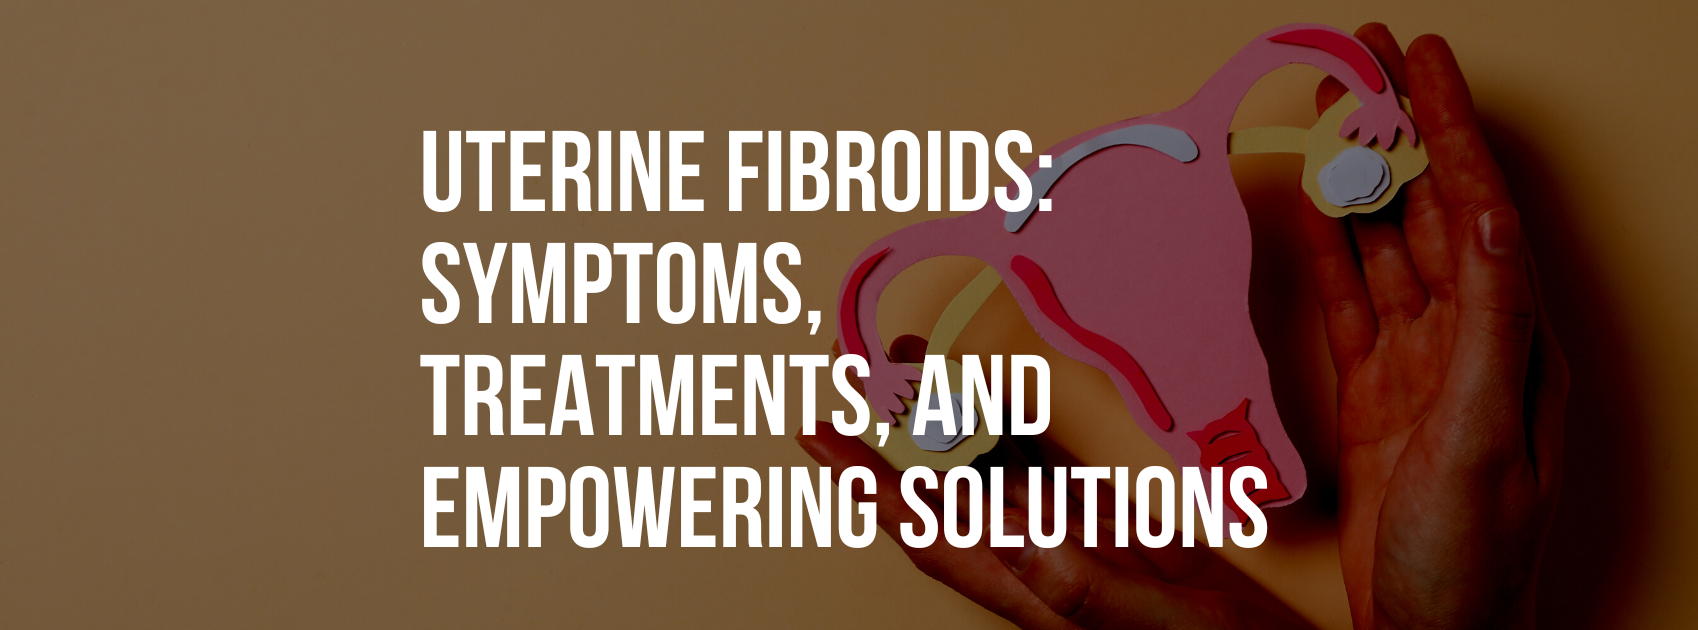 Uterine Fibroids: Symptoms, Treatments, and Empowering Solutions Explained